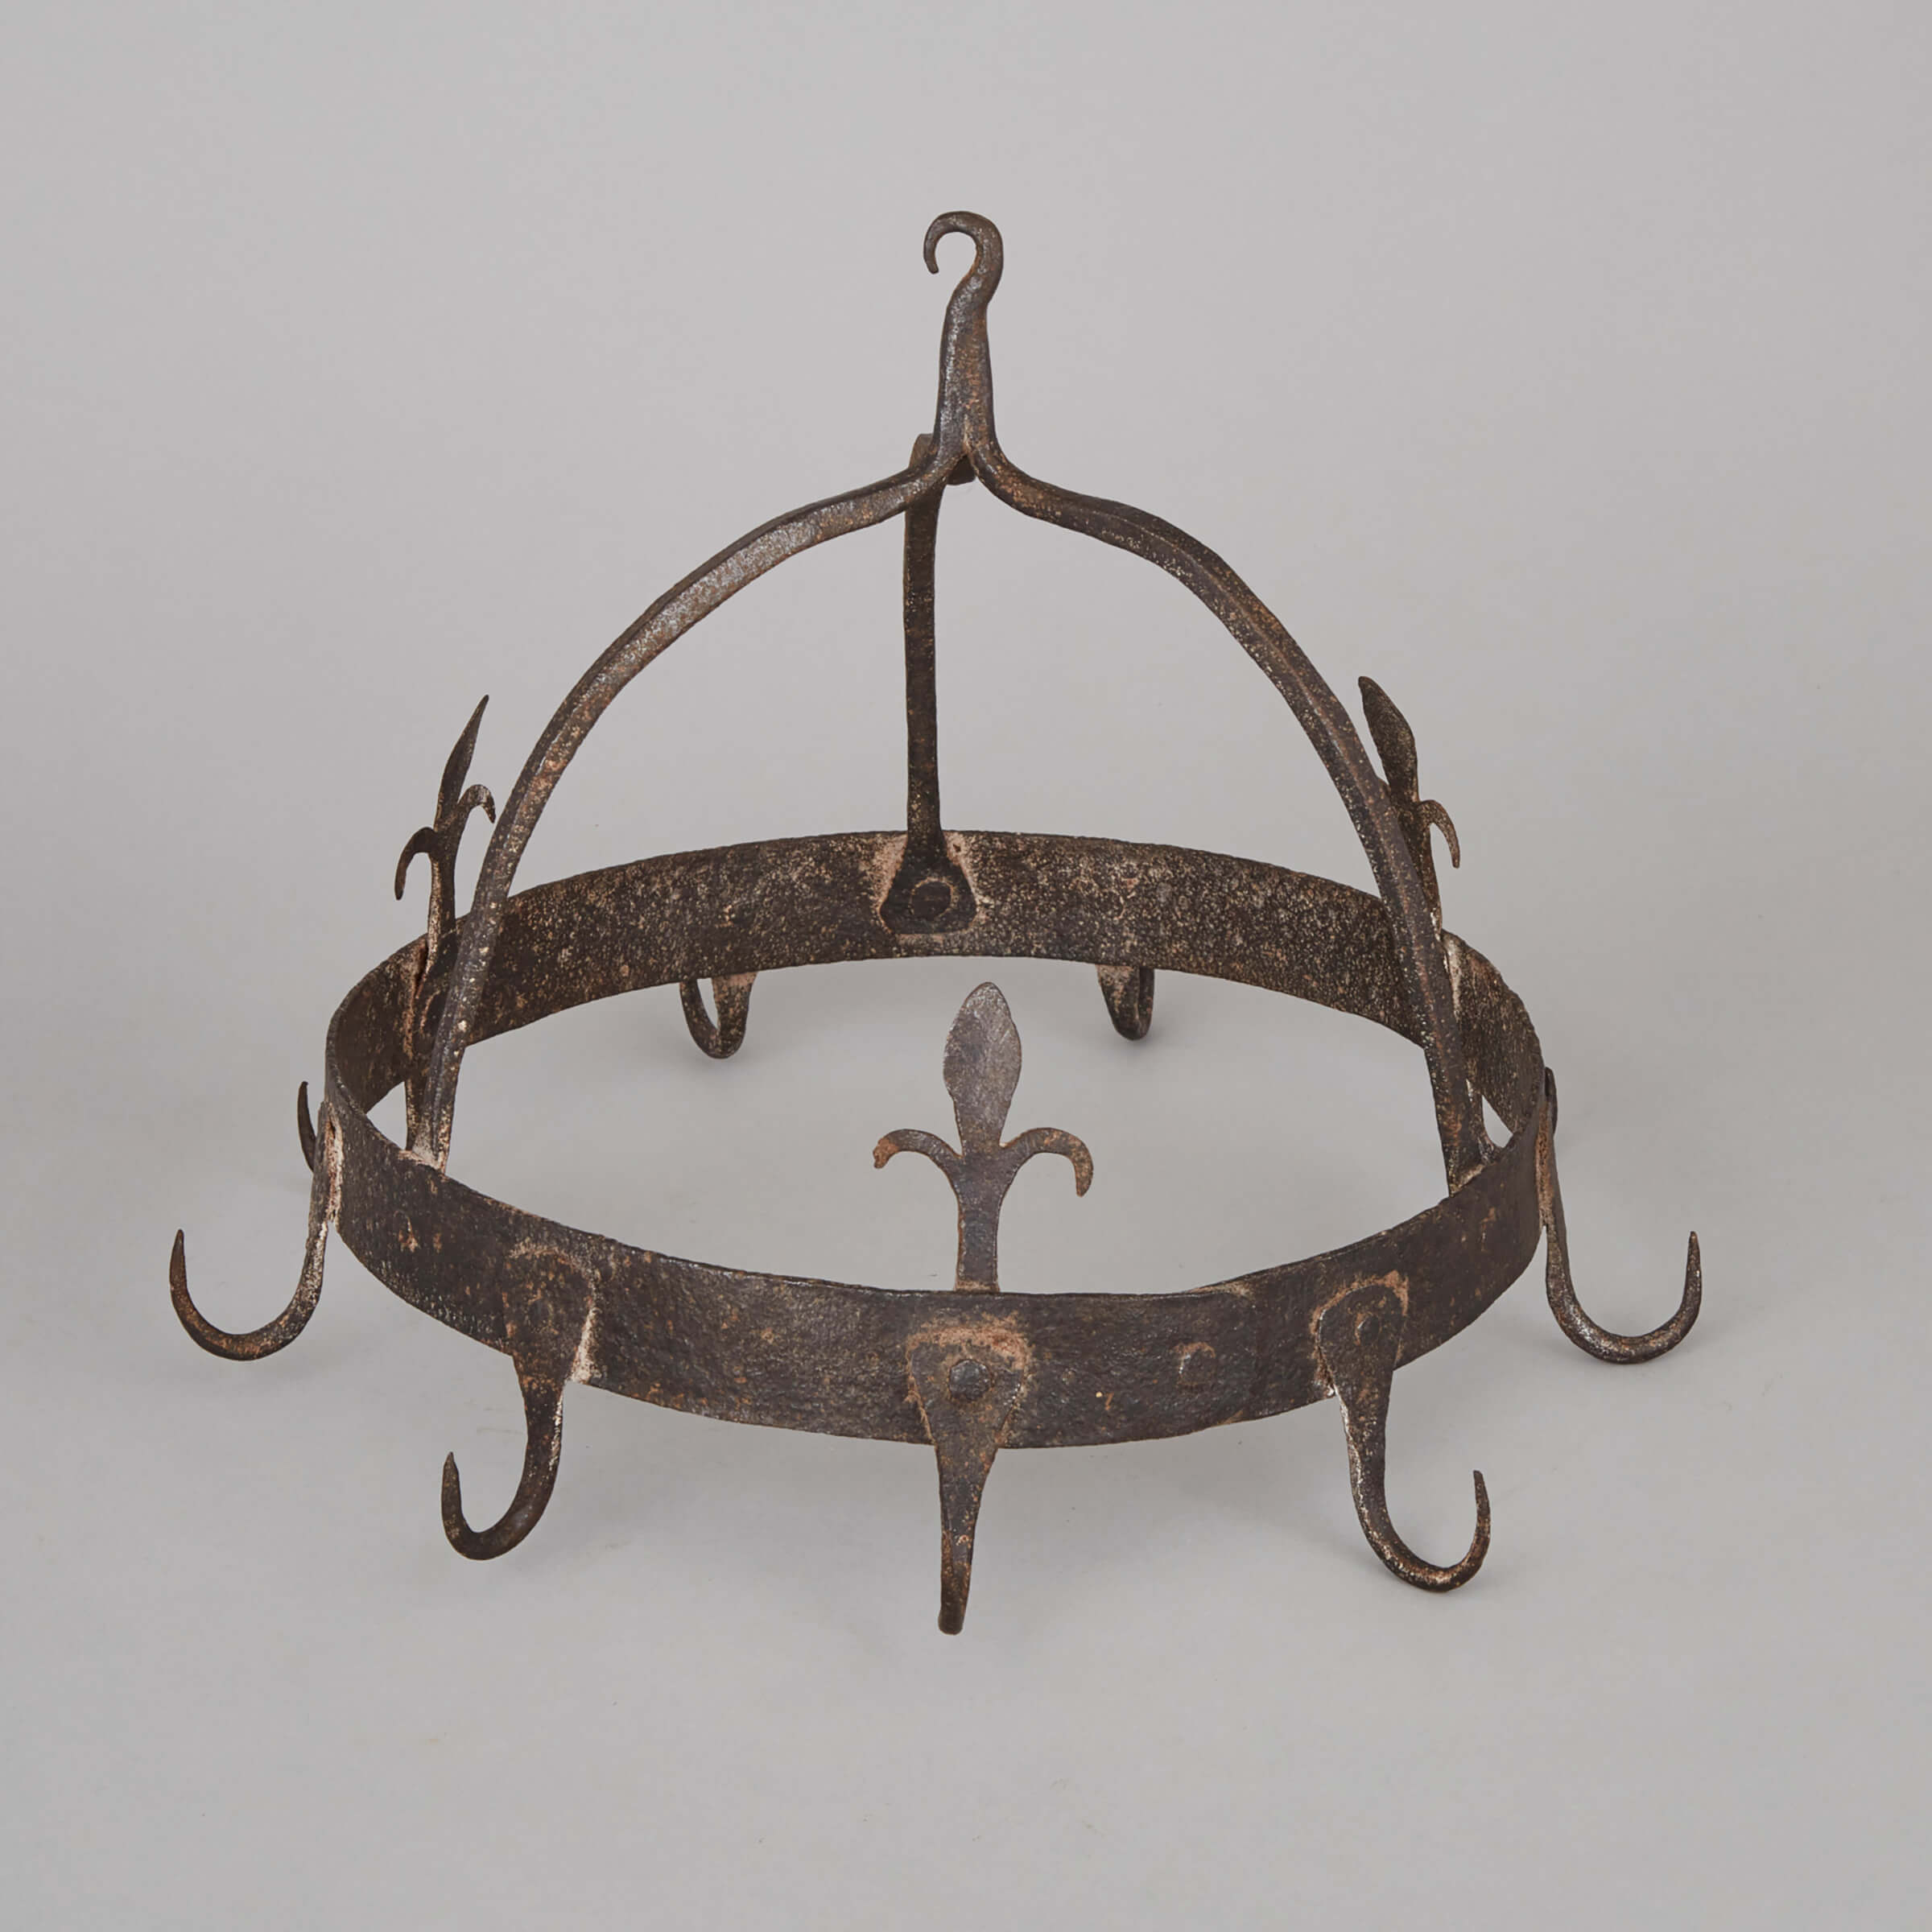 French Wrought Iron ’Dutch Crown’ Game Hanger, 18th century